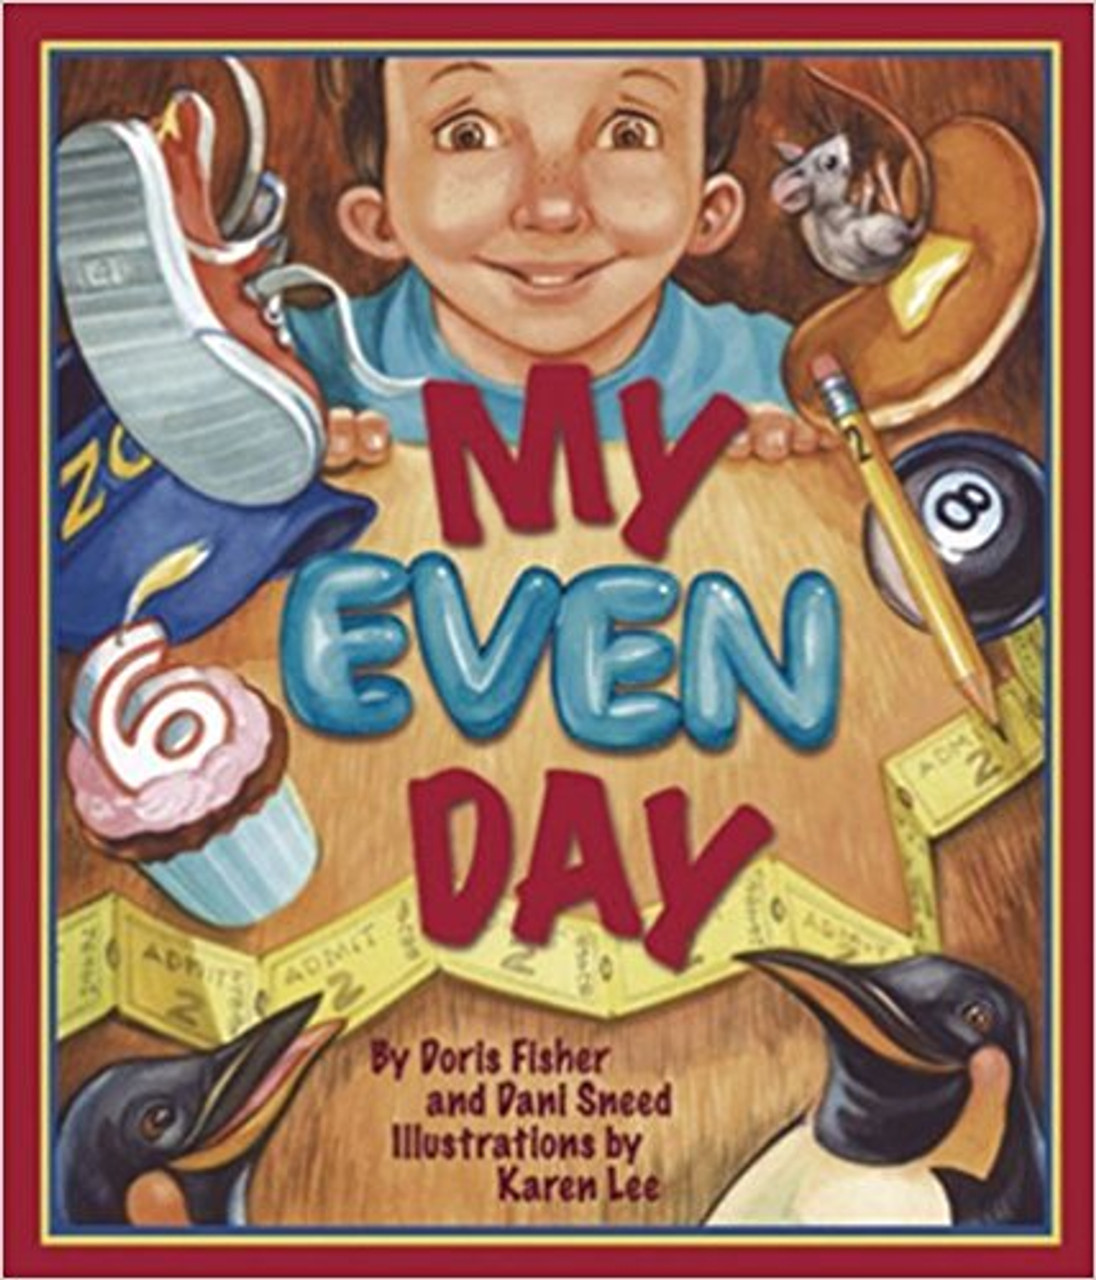 In this rhyming sequel to One Odd Day, the young boy awakens to find that it is another strange day.  Now everything is even and his mother has two heads!  This time, a school field trip to the zoo is dealt with in an odd, but even-handed manner.  Includes "For Creative Minds" section with fun facts and number games.